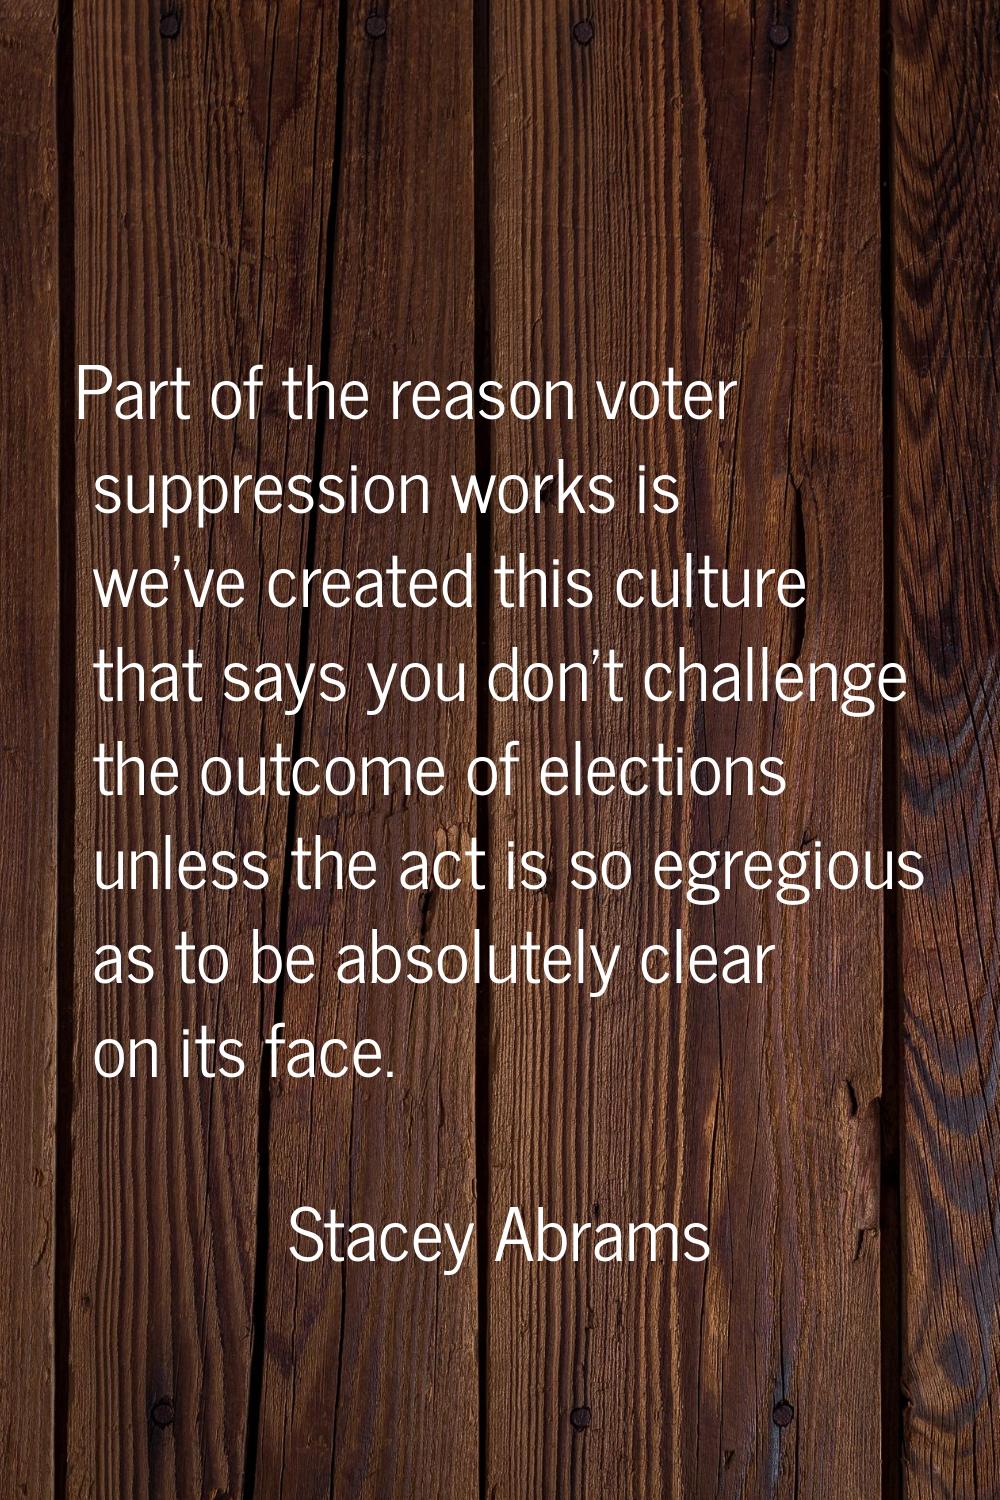 Part of the reason voter suppression works is we've created this culture that says you don't challe